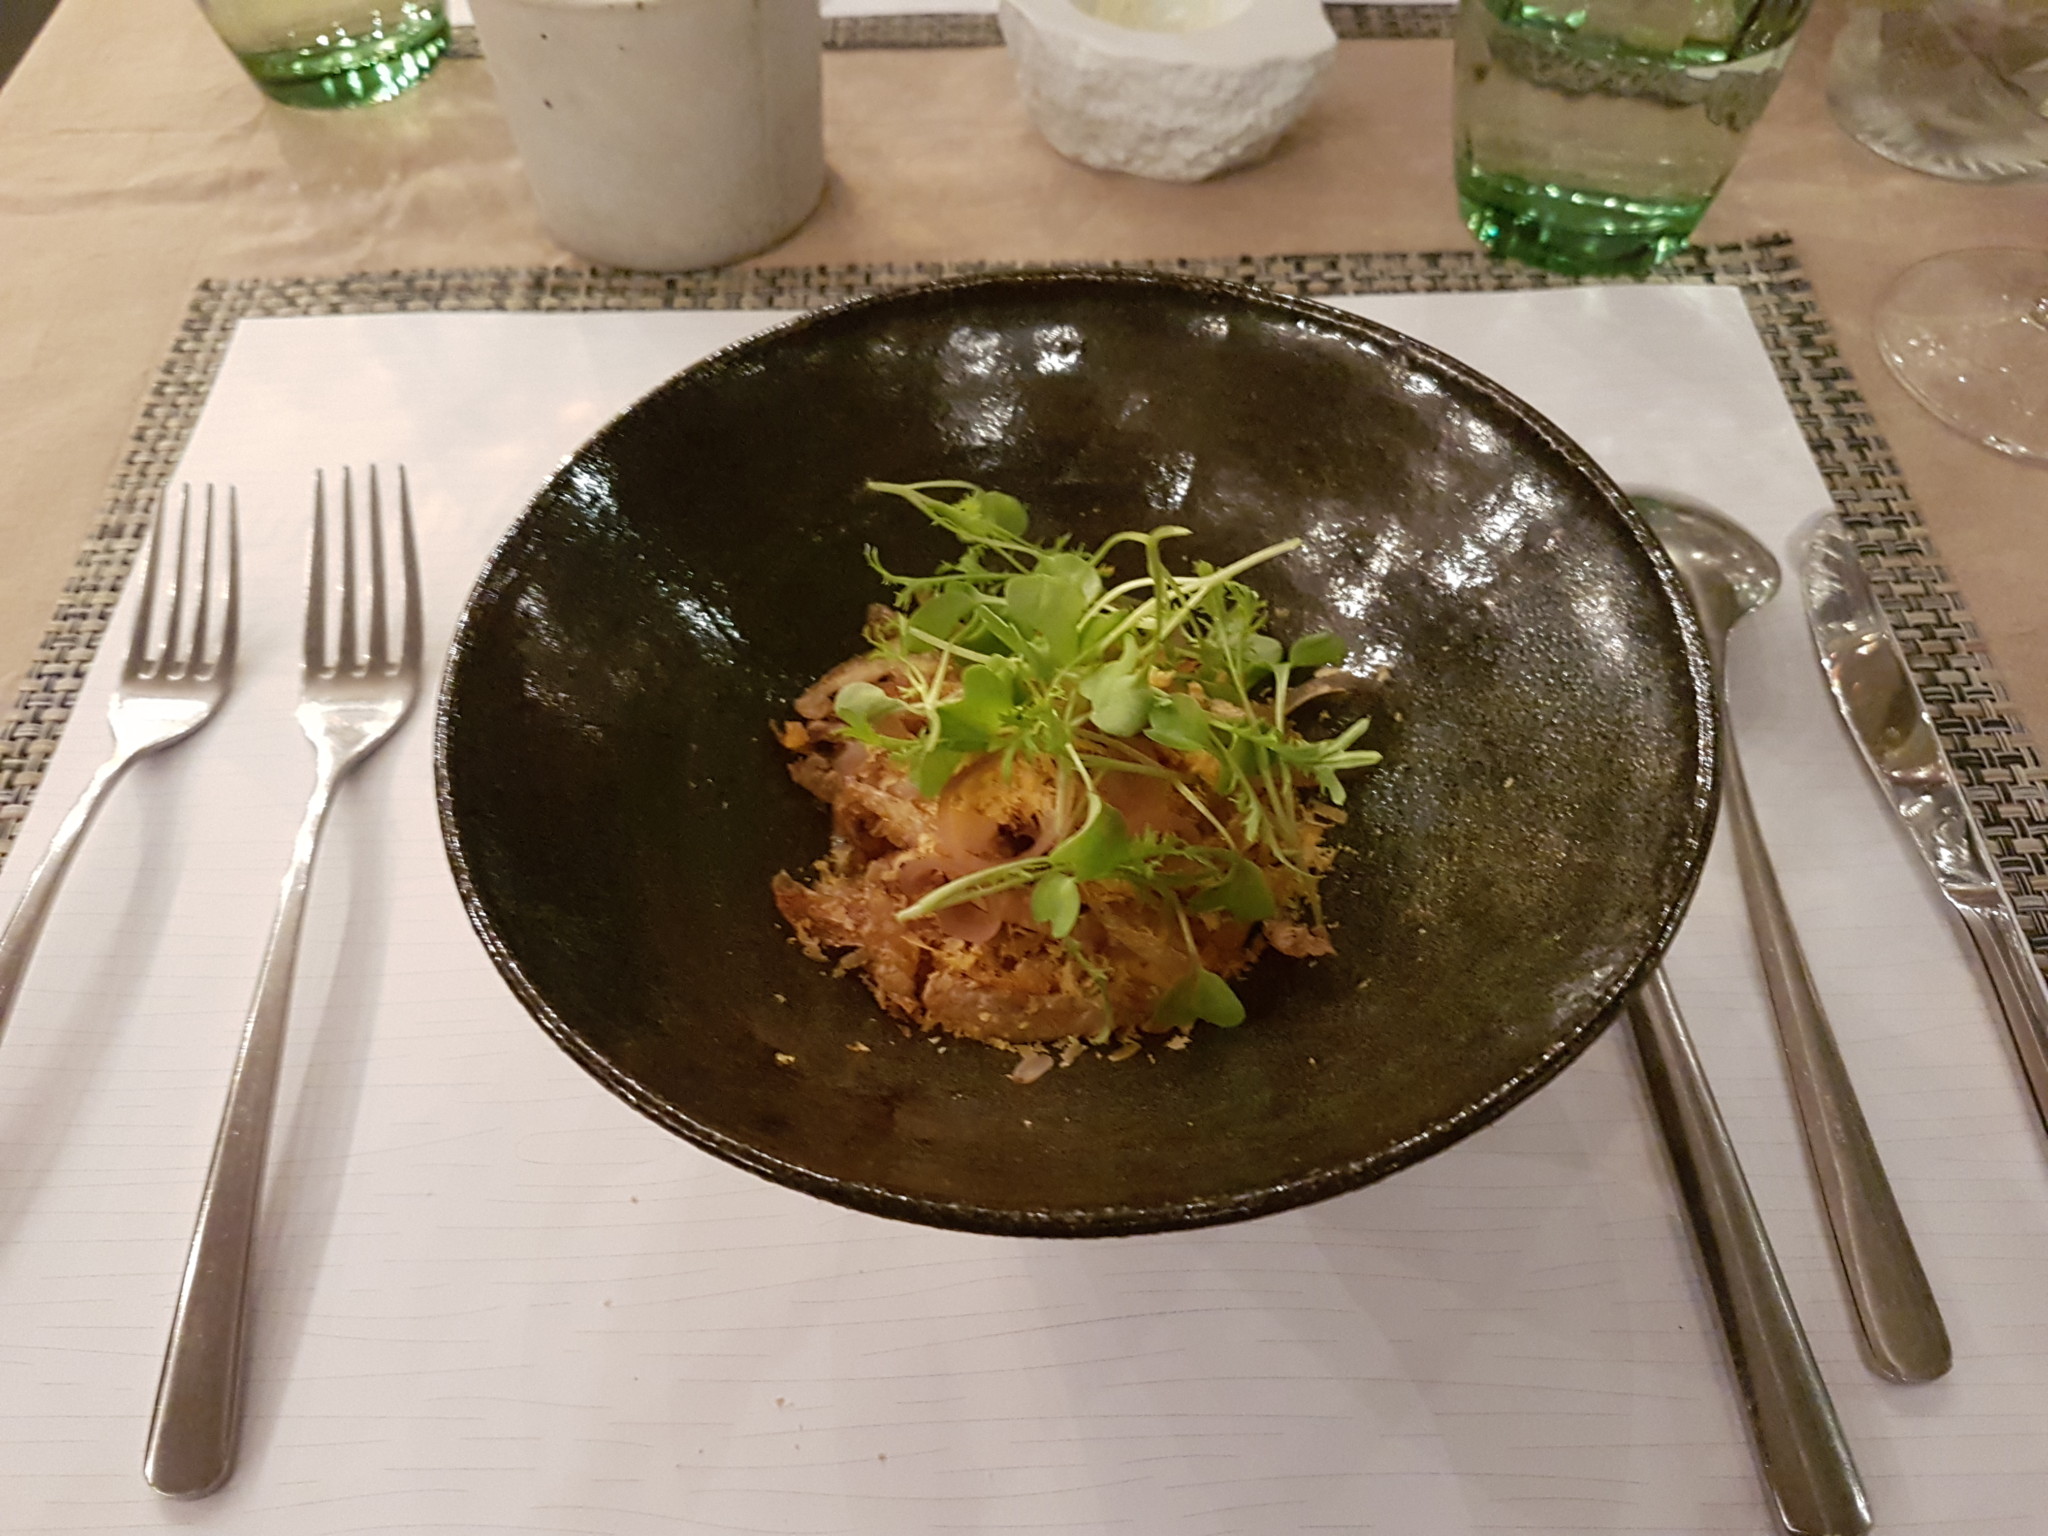 Michelin Star Tanti - The Chef Asked "What's the Worst Thing I Served Tonight"